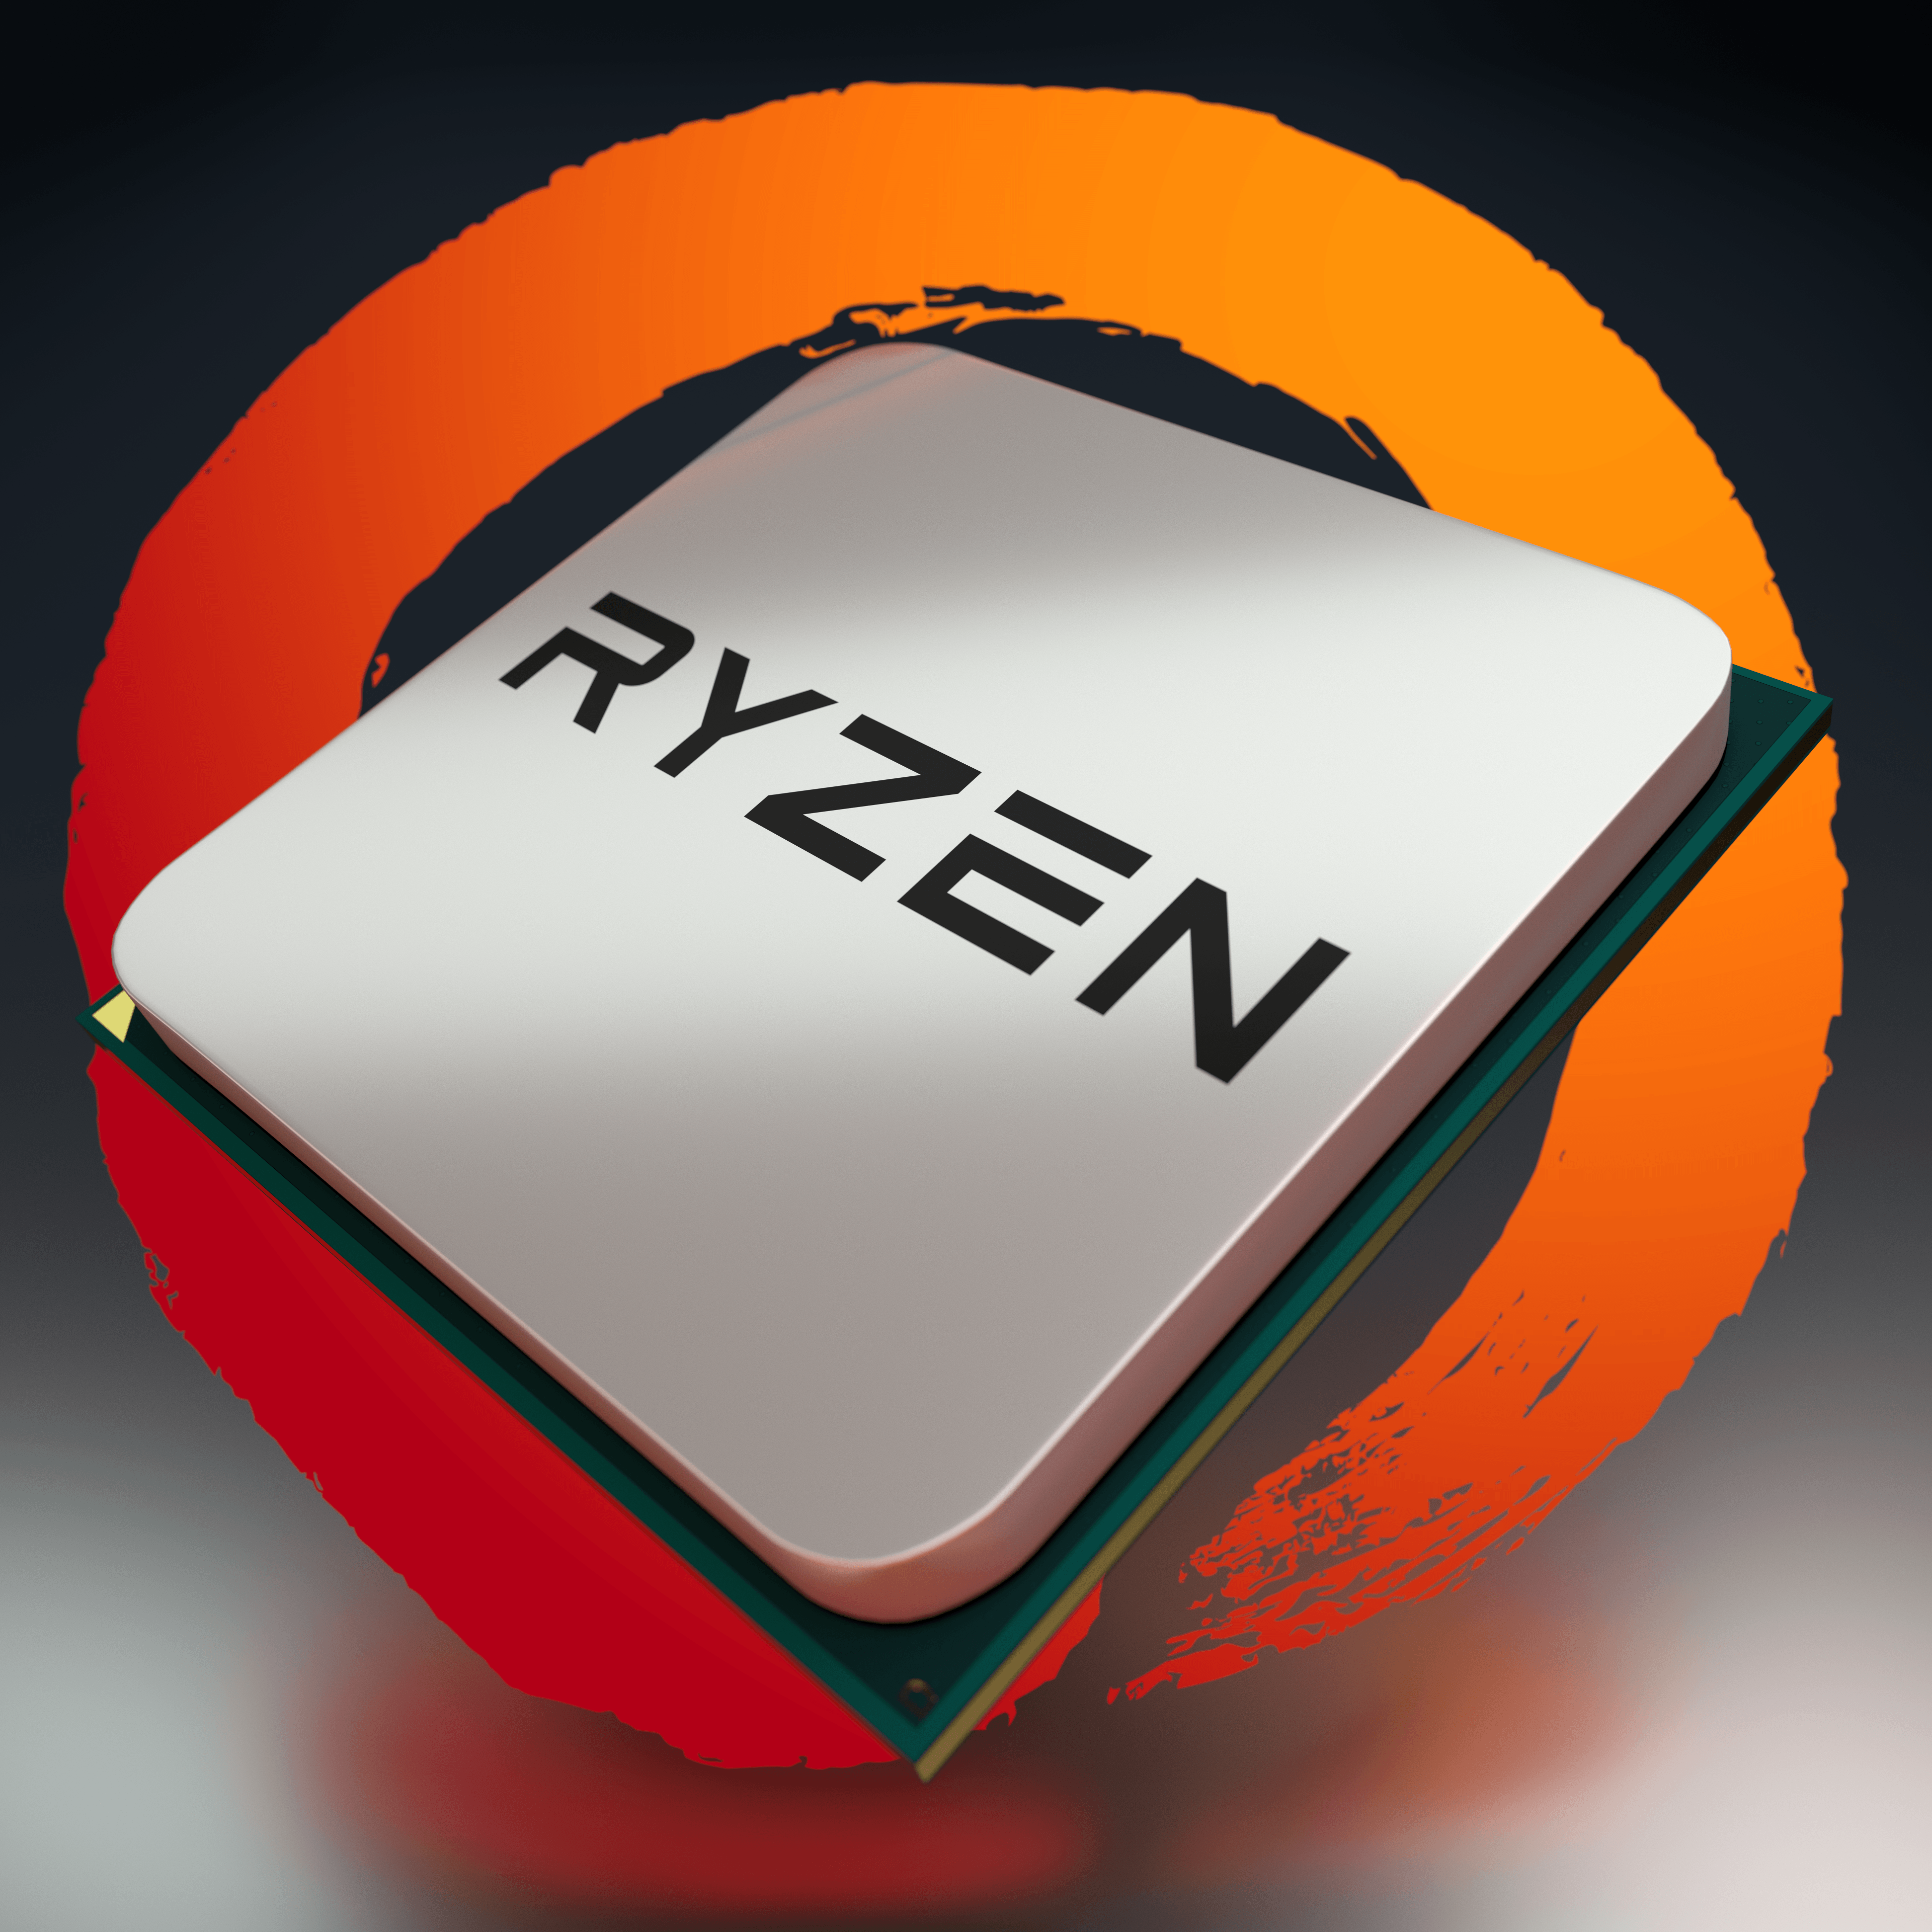 AMD Ryzen Logo - 8K RYZEN logo (perfect for a wallpaper) link to full res in comments